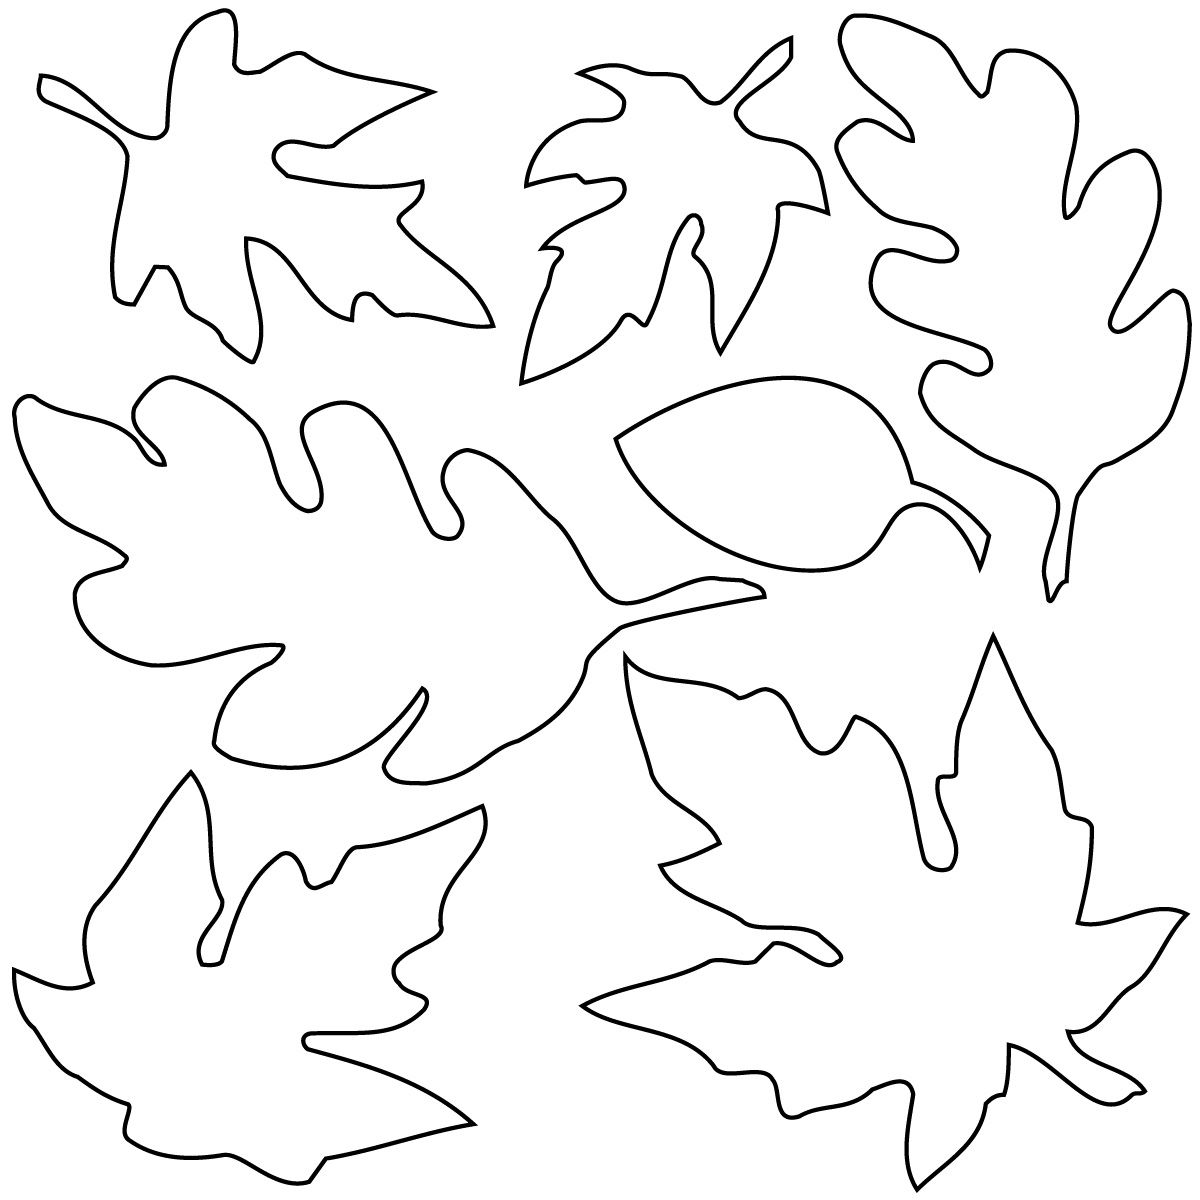 Fall Leaf Coloring Page - Coloring Page Photos